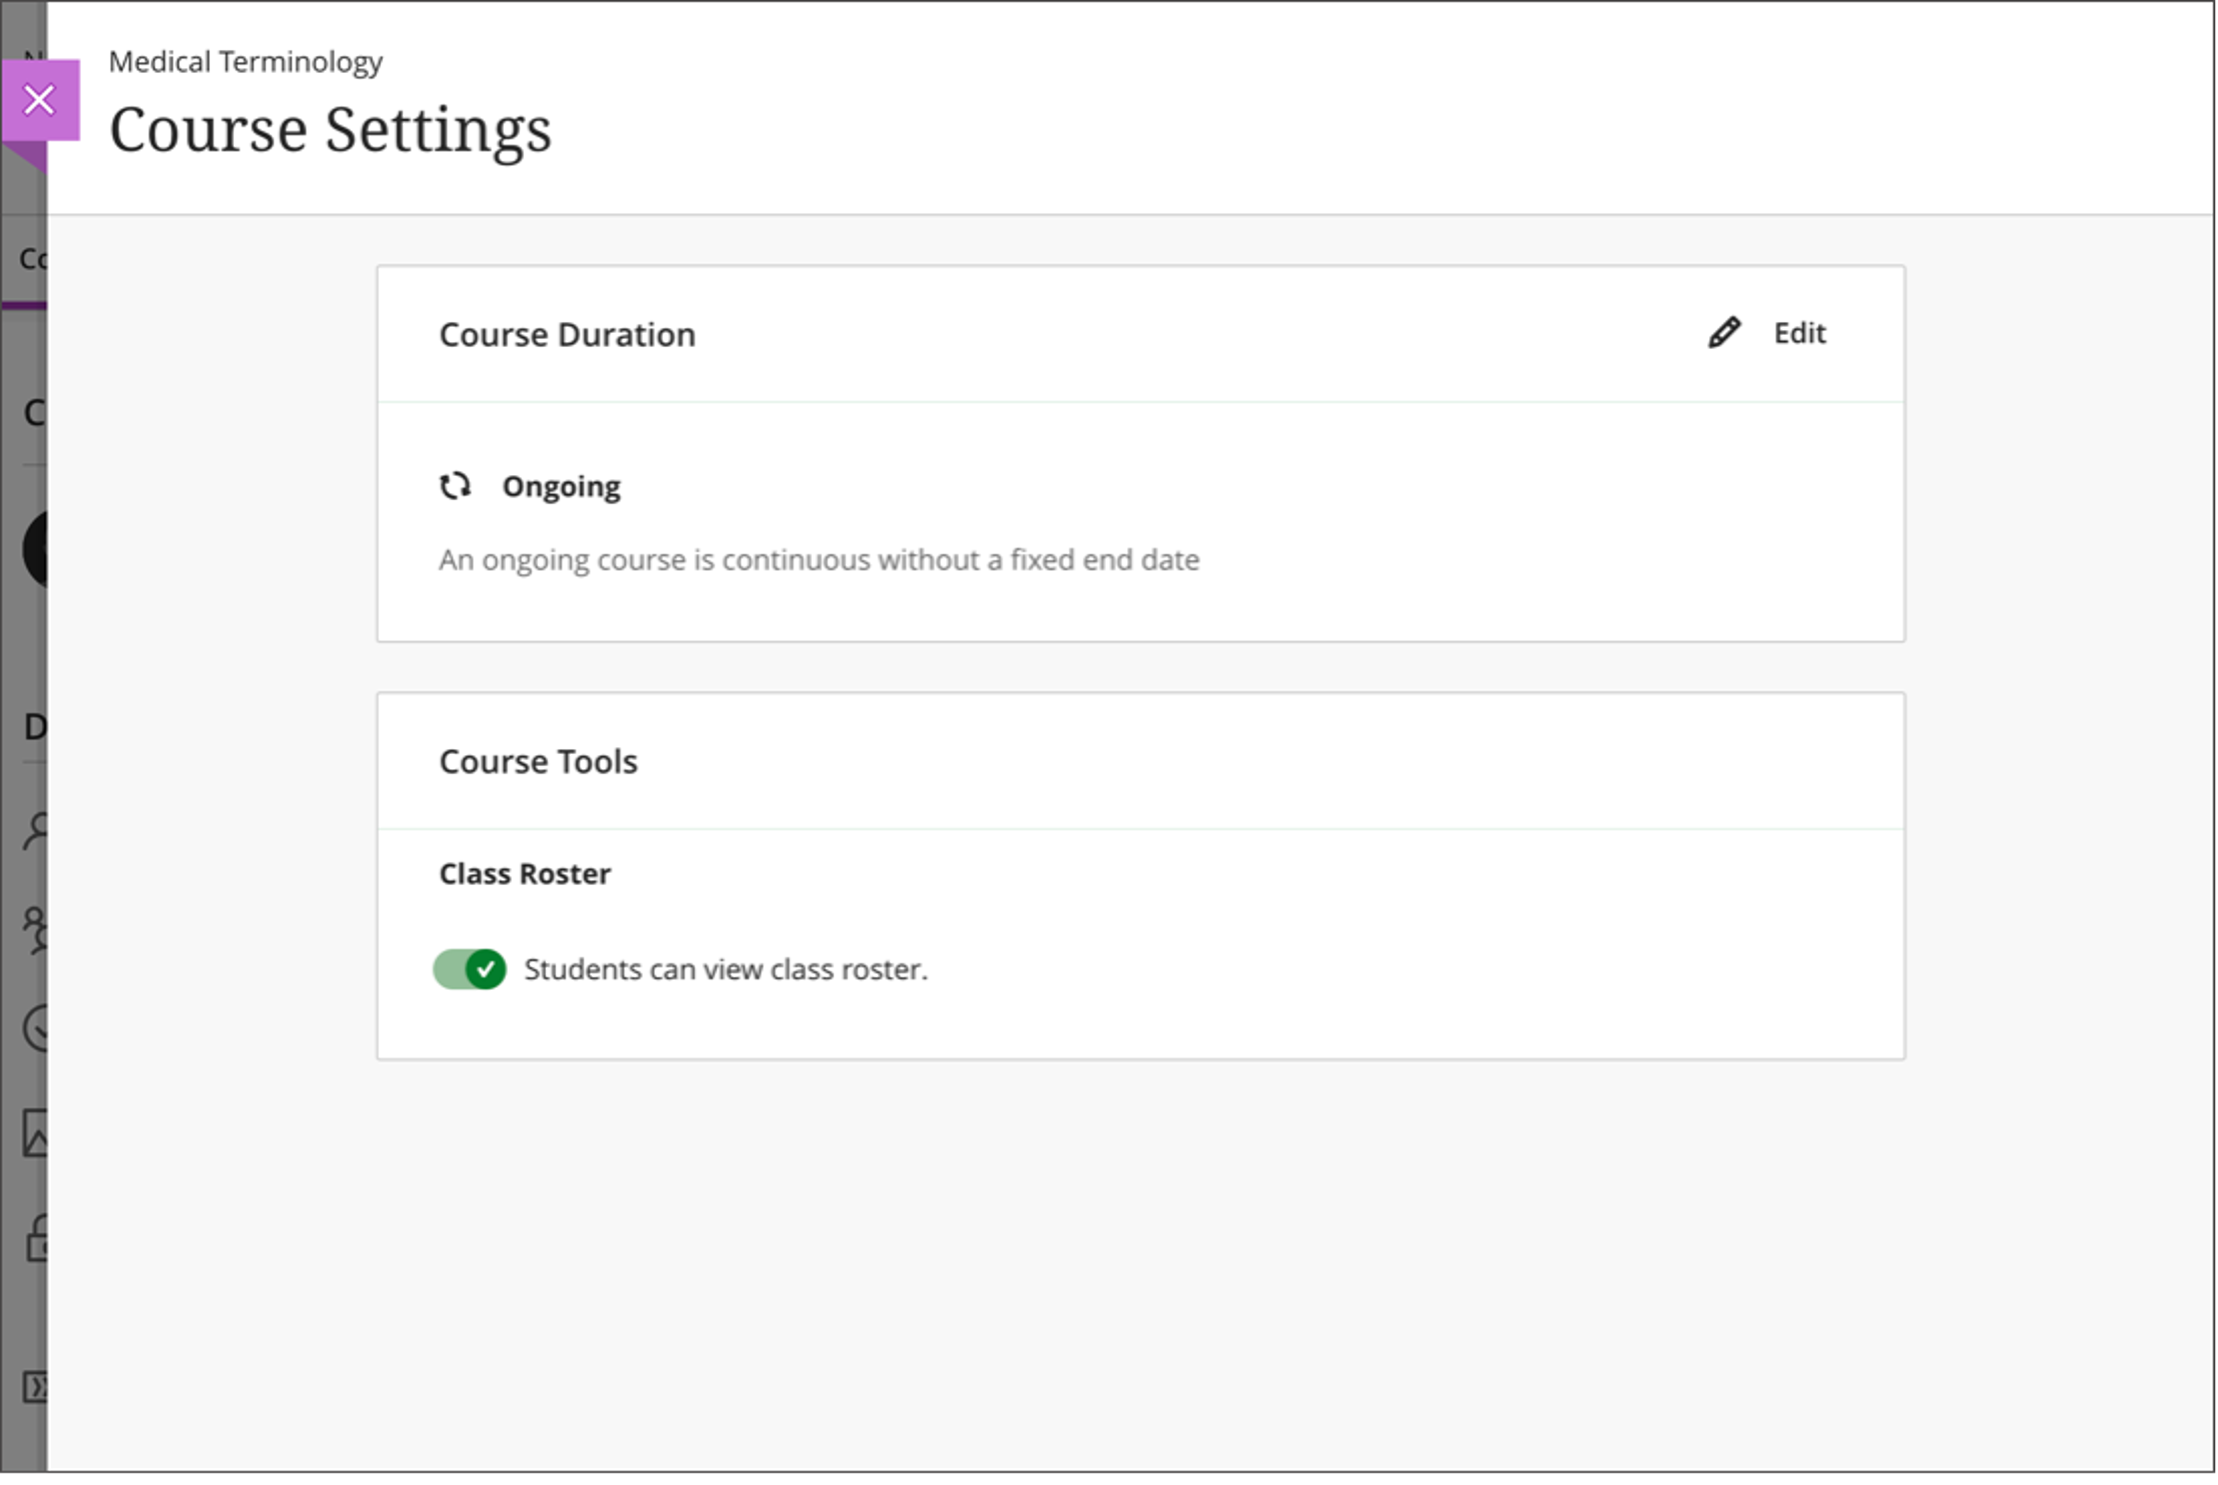 A user with the applicable privileges can manage the course duration and student access to the roster in the Course Settings panel